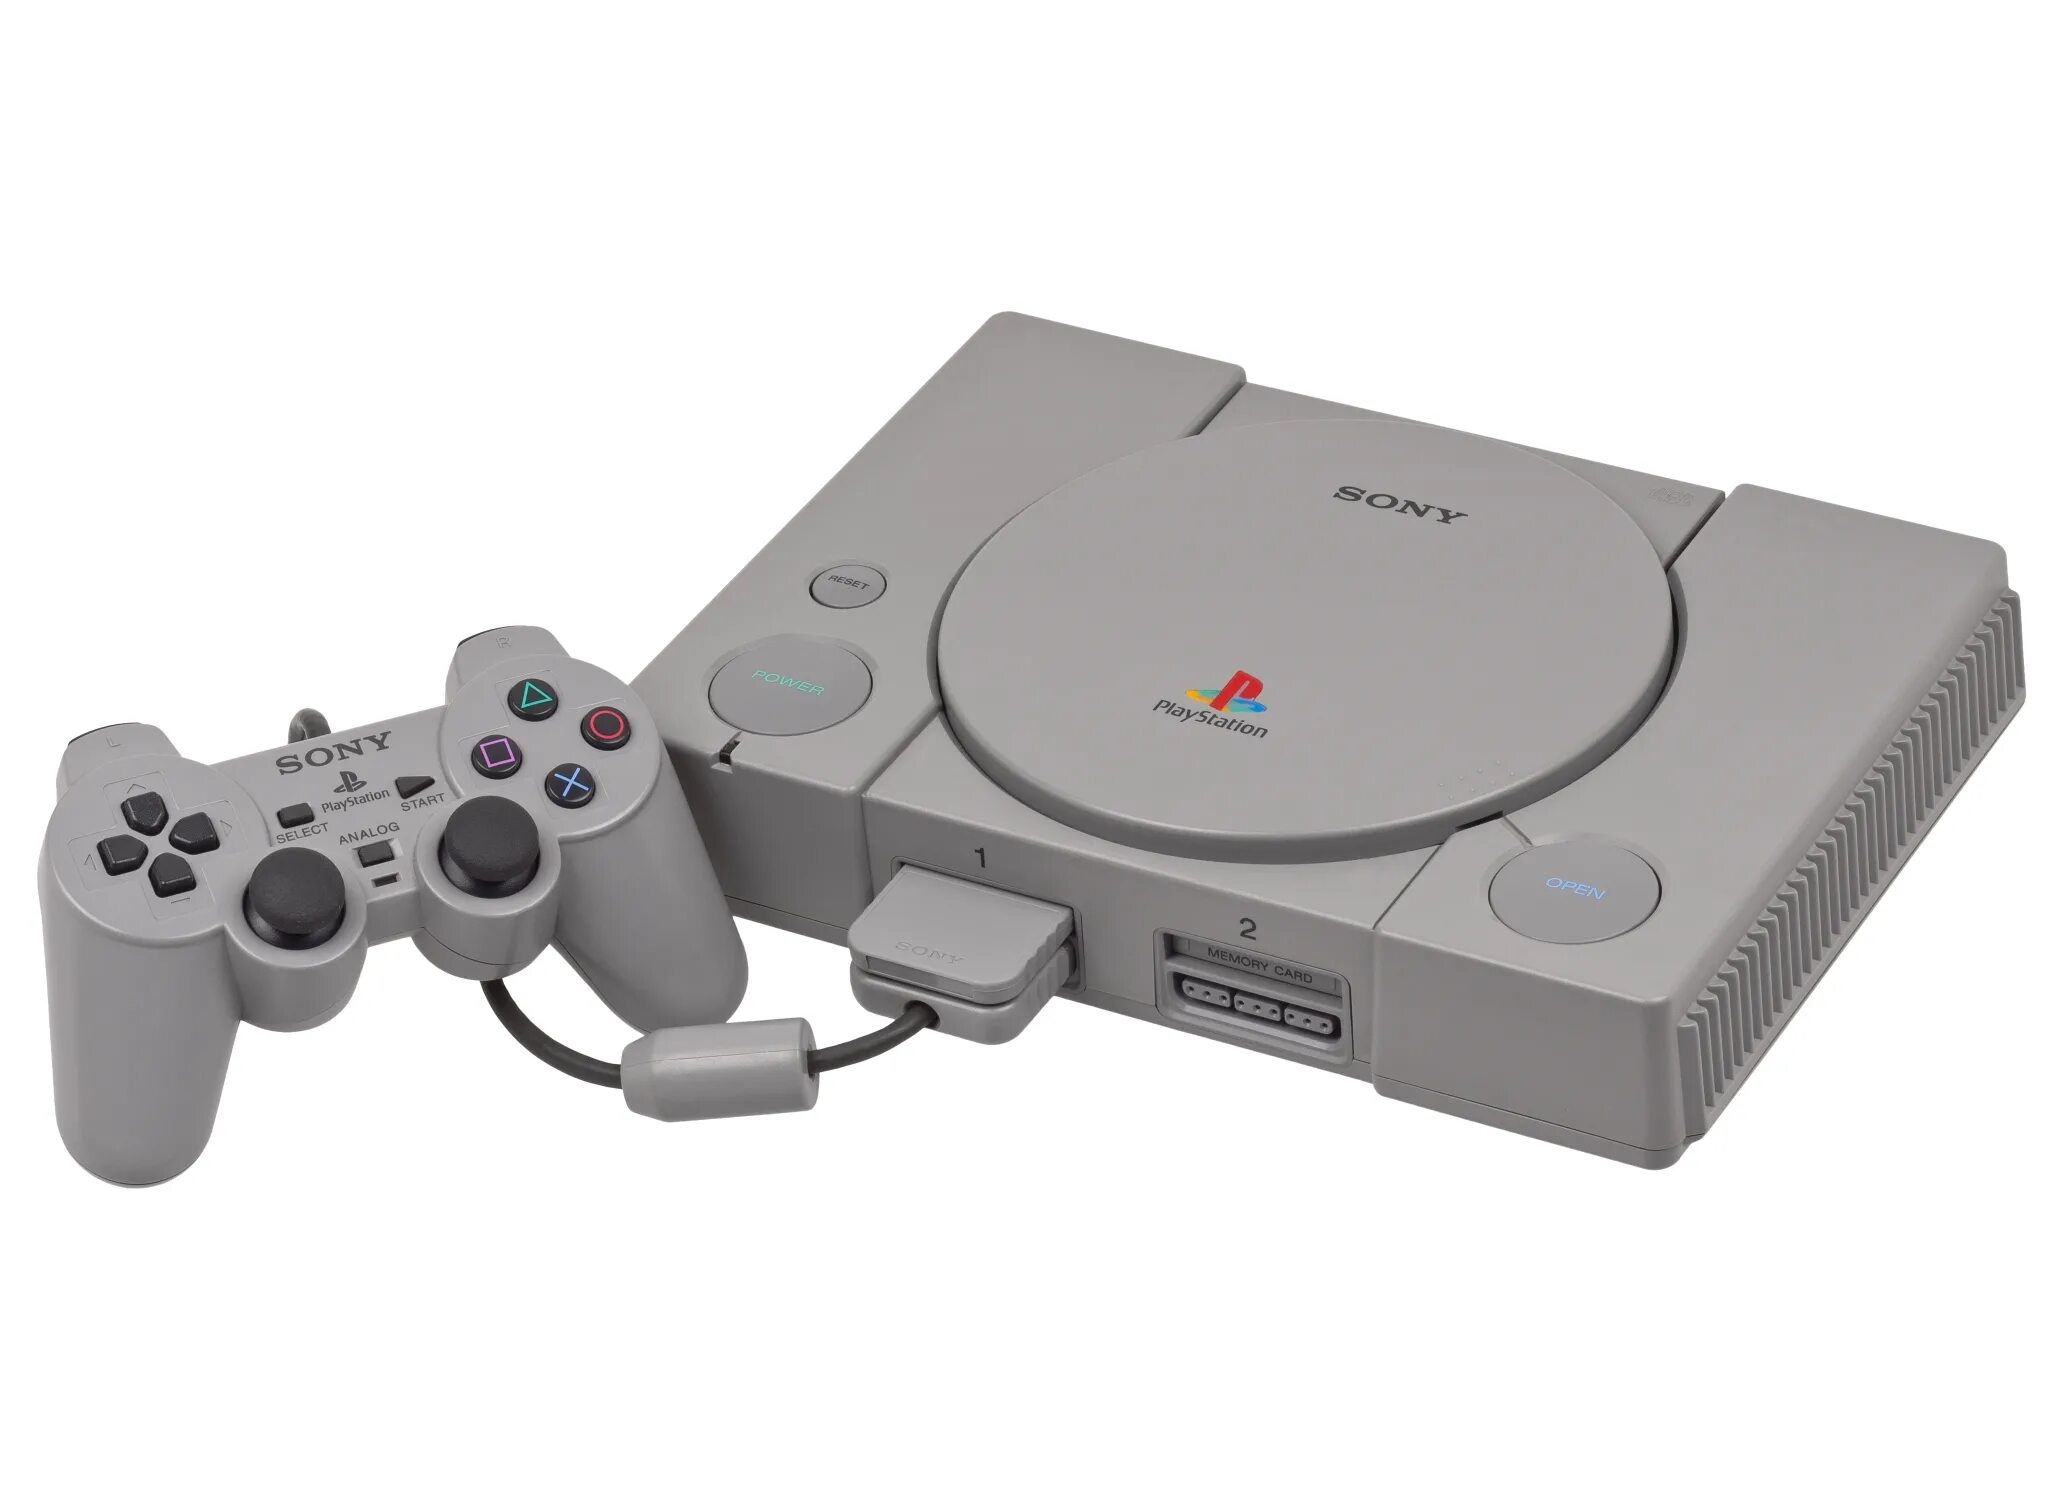 Sony playstation cfi 2000. Sony ps1. Sony ps1 SCPH-1001. Ps1 SCPH 1000. Sony ps1 Classic.